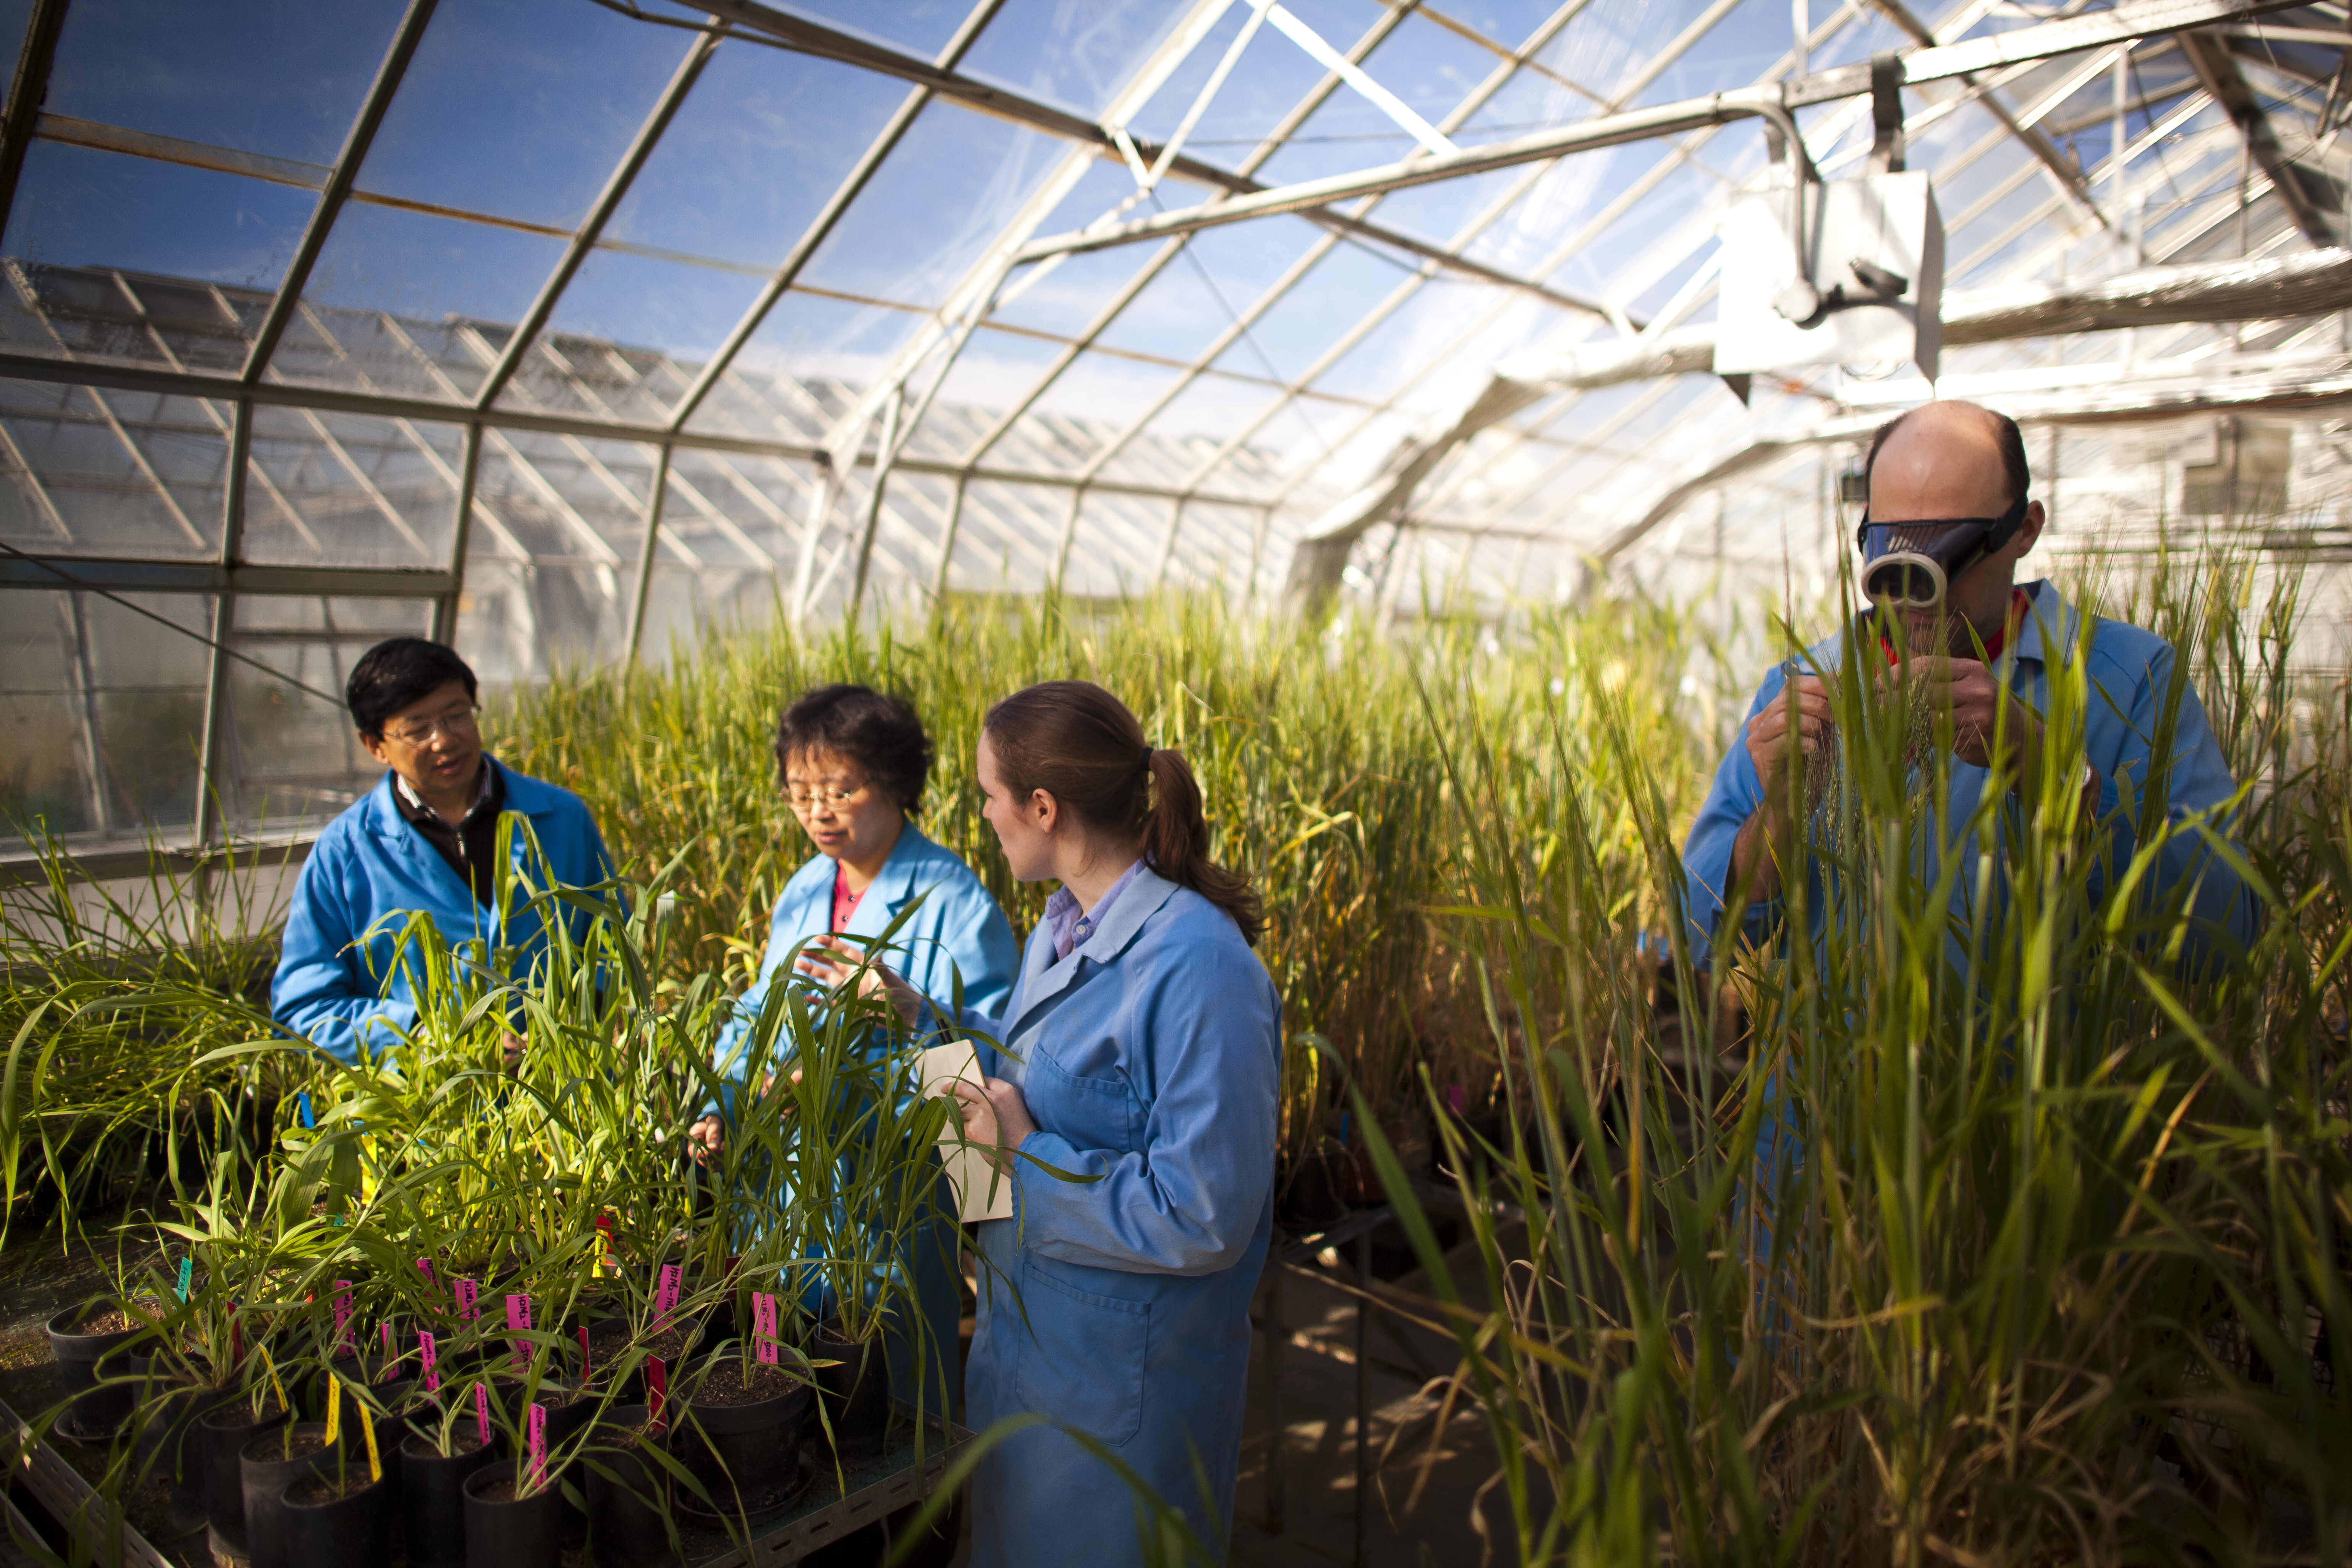 Researchers inspecting BarleyMax plants in a greenhouse